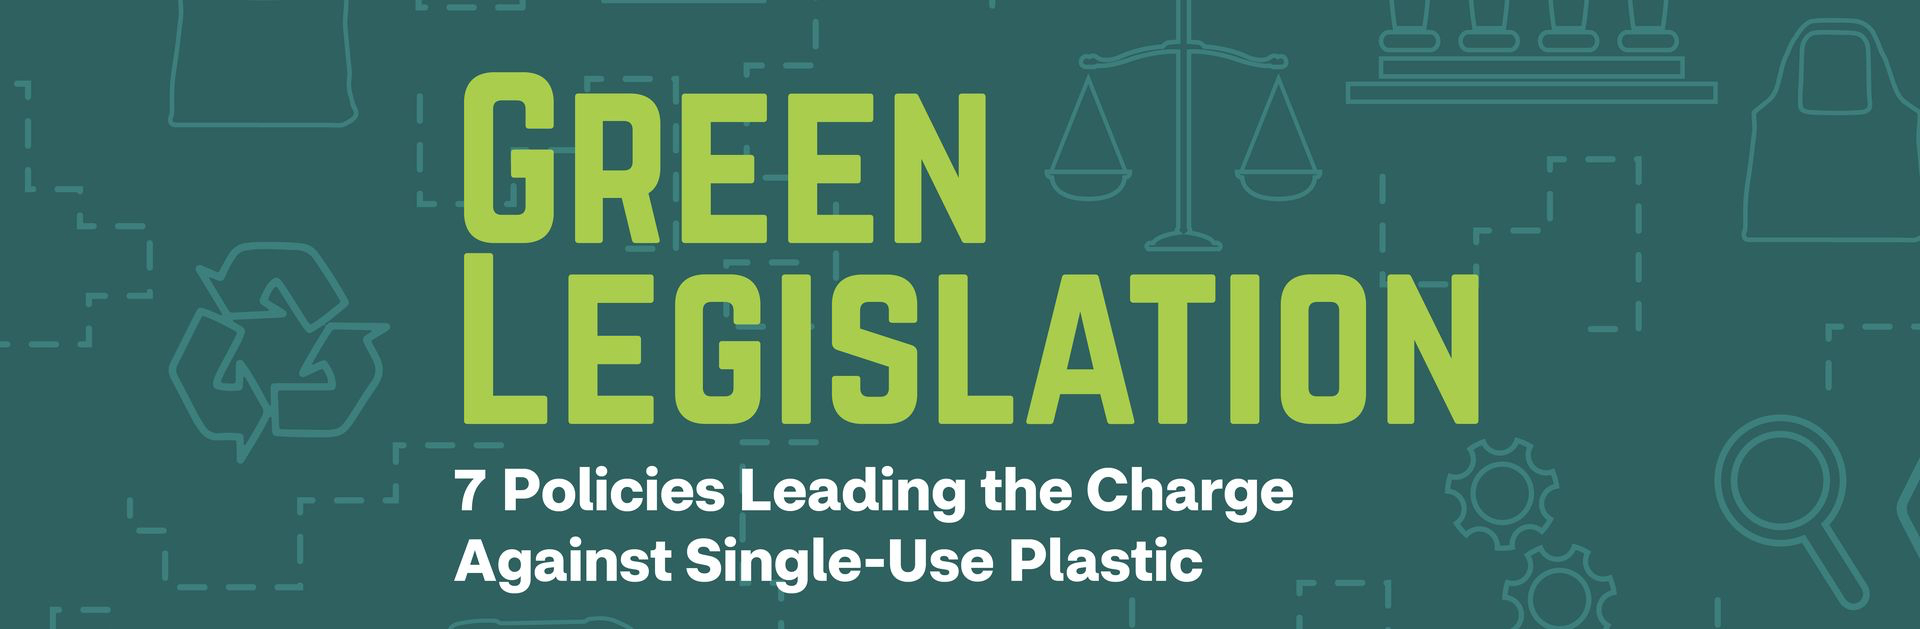 Green Graphic showing the text Green Legislation, and 7 policies leading the charge against single-use plastic